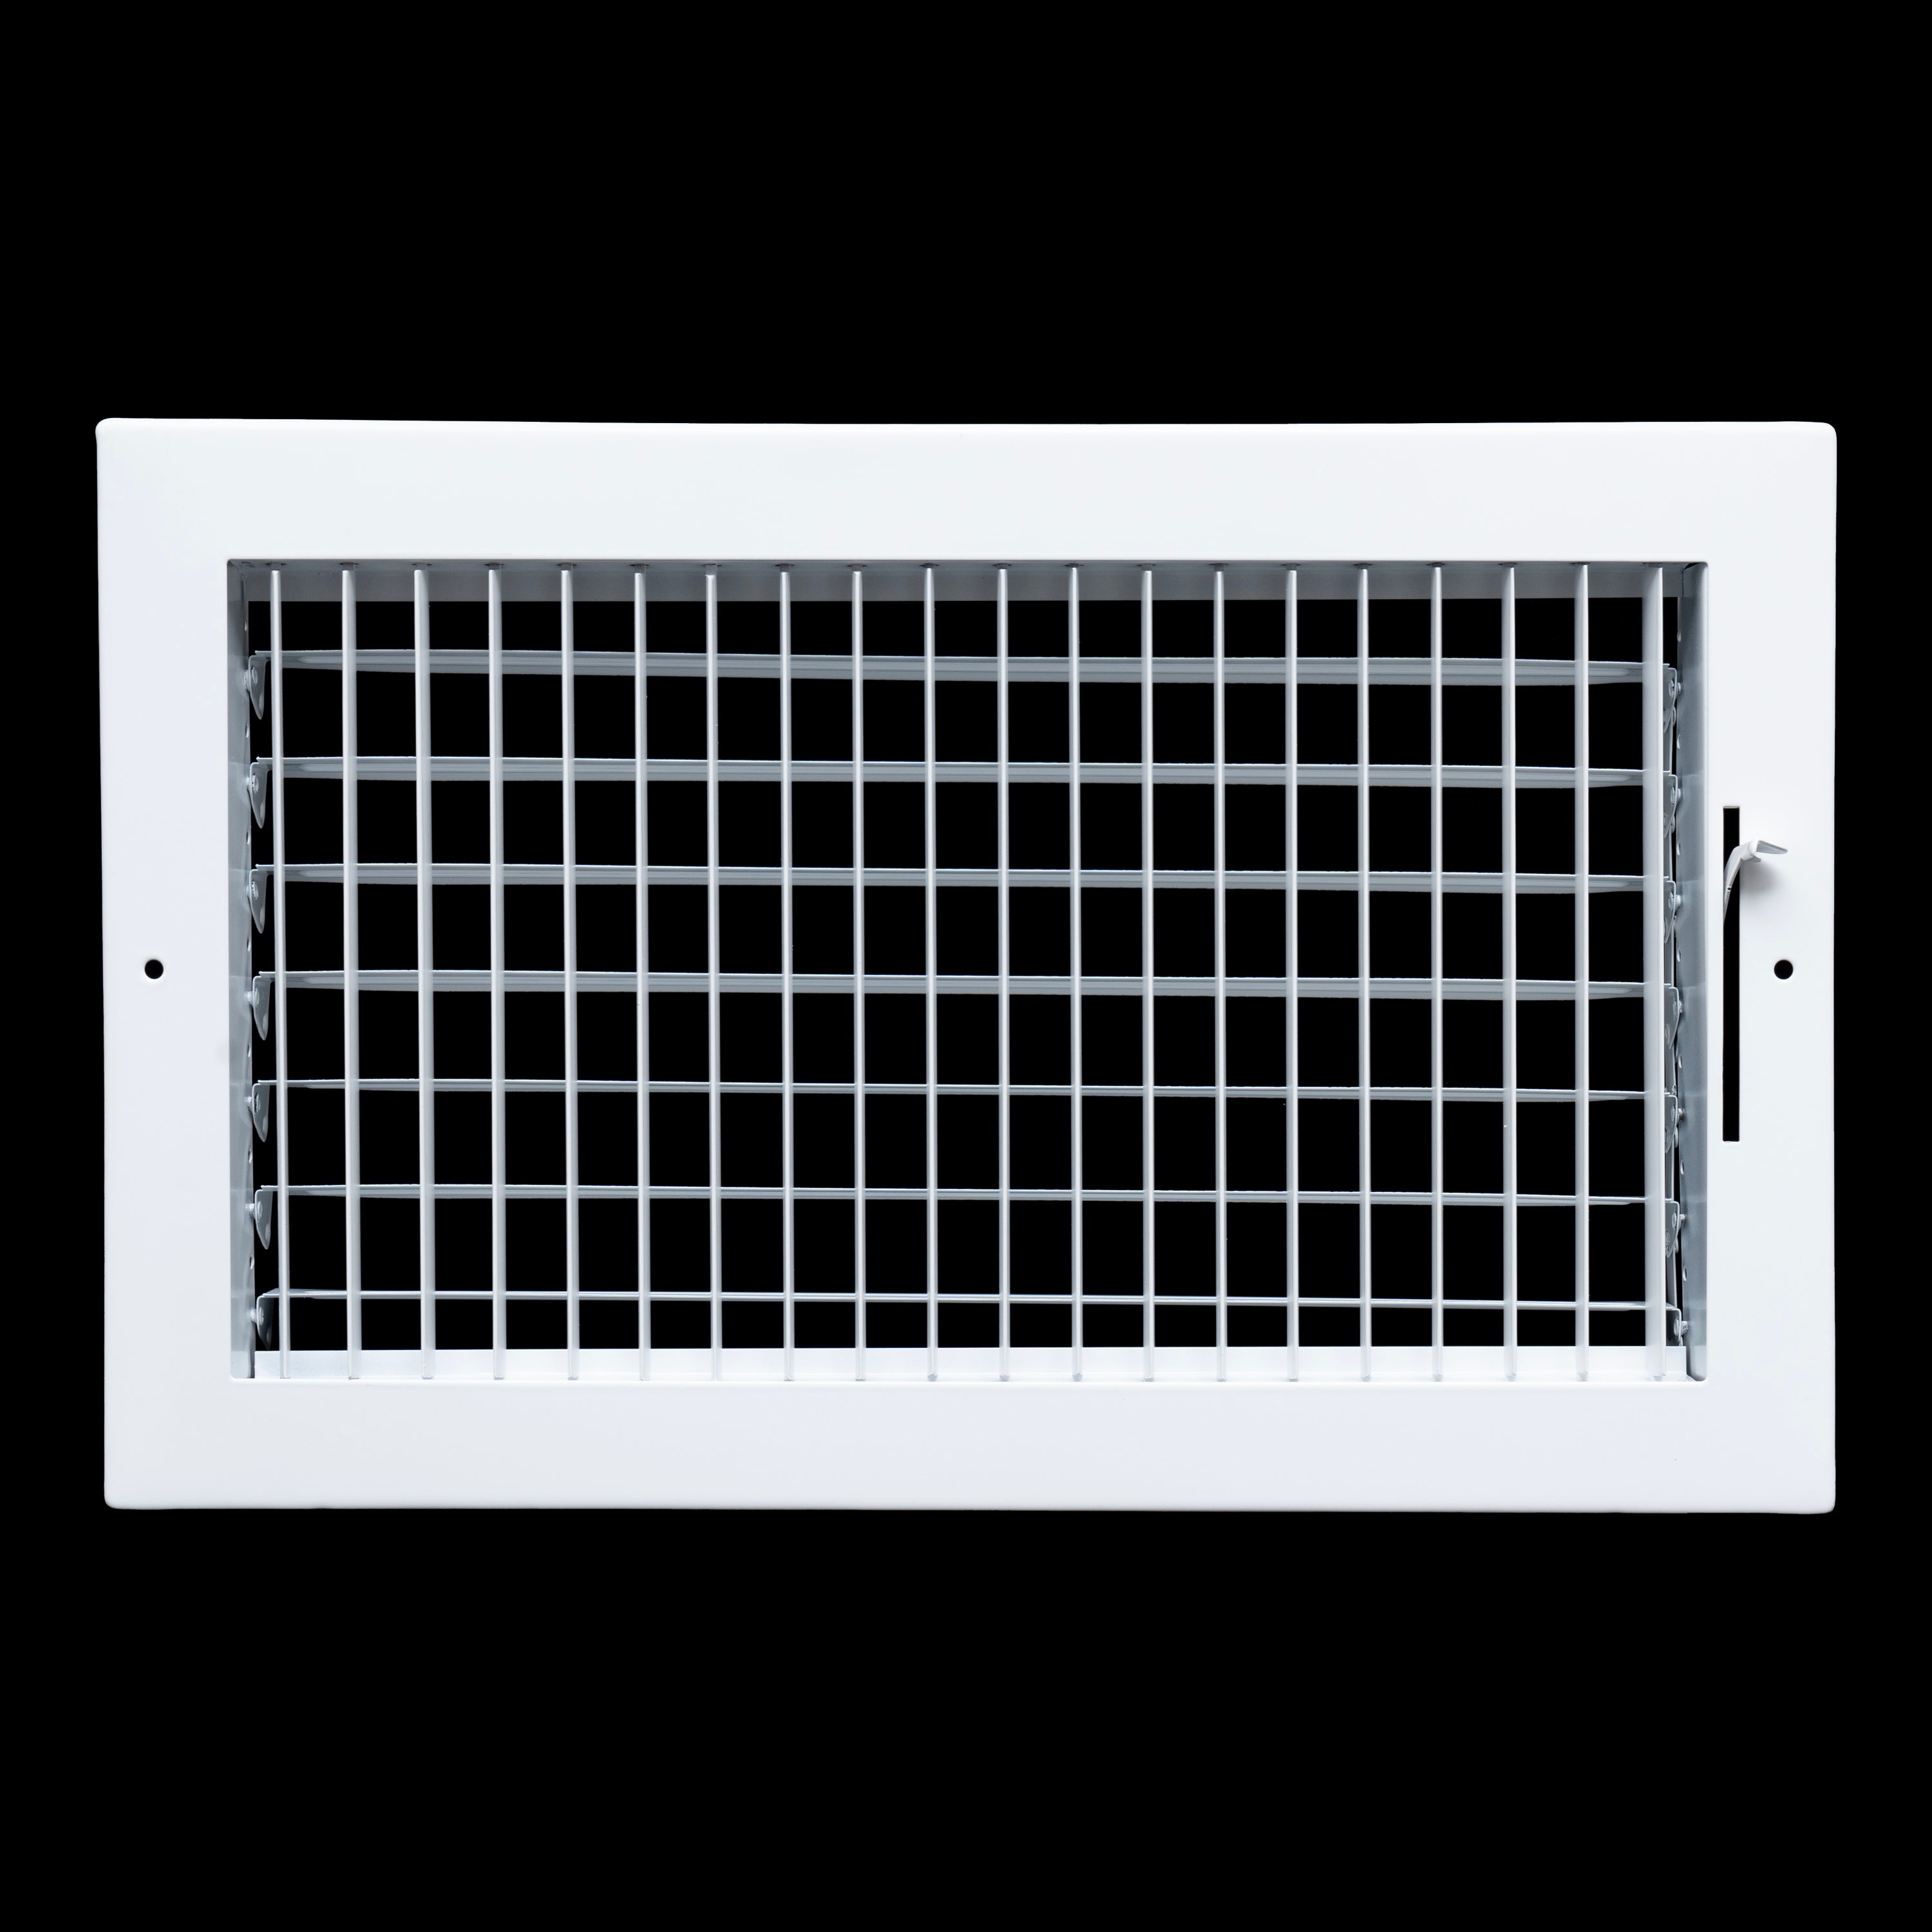 airgrilles 14x8 steel adjustable air supply grille register vent cover grill for sidewall and ceiling White  Outer Dimensions: 15.75"W X 9.75"H for 14x8 Duct Opening